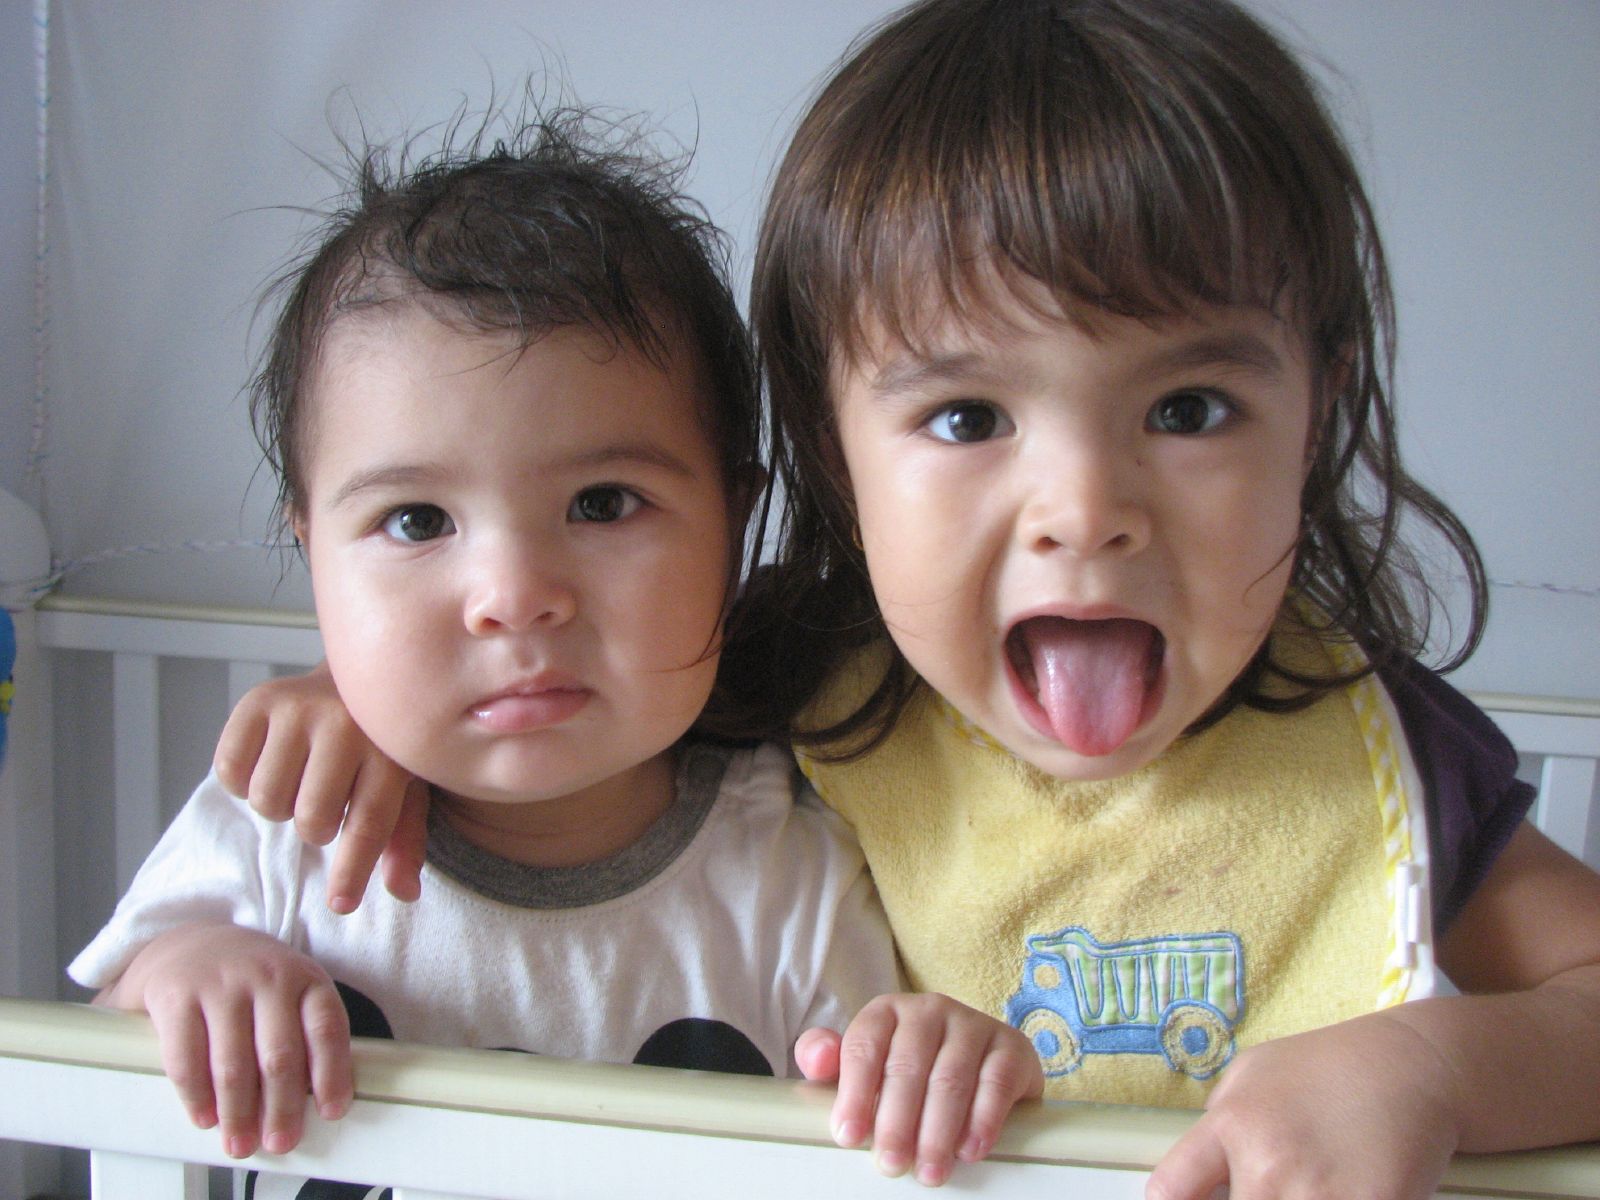 two small children posing on a bed with their mouths open